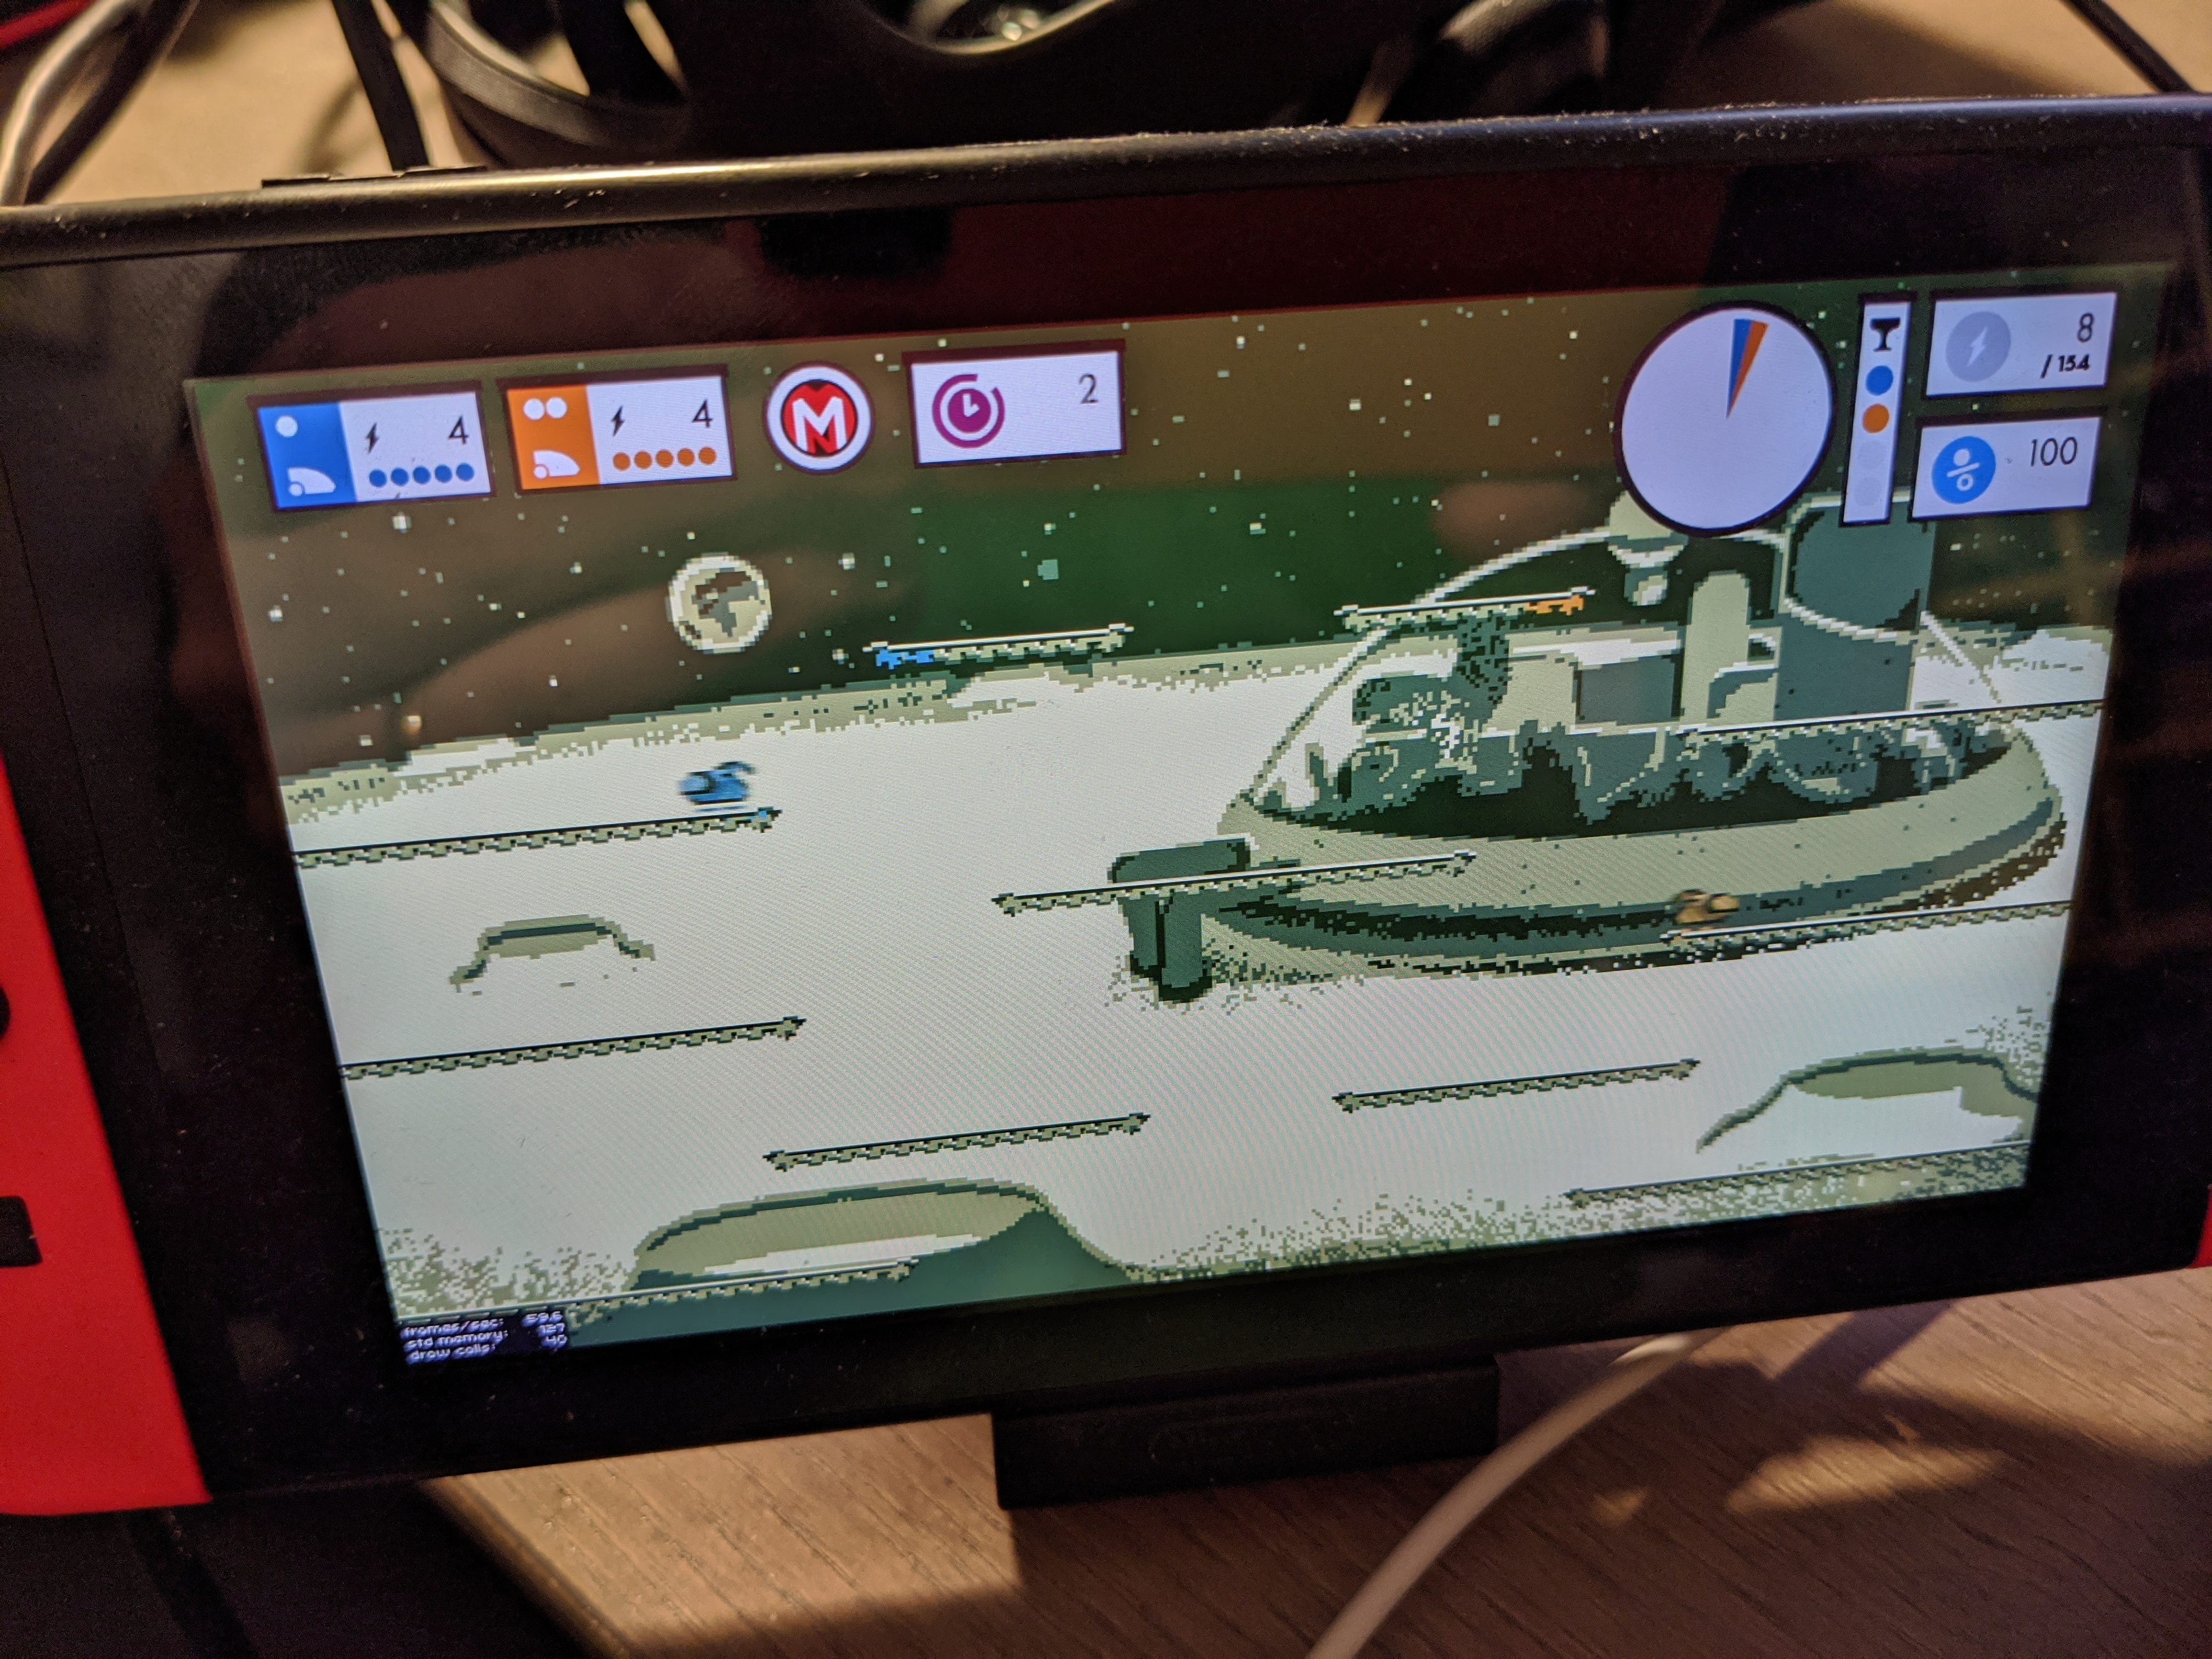 A photo of Metro Nexus running on a Nintendo Switch, showing the multiplayer battle mode.